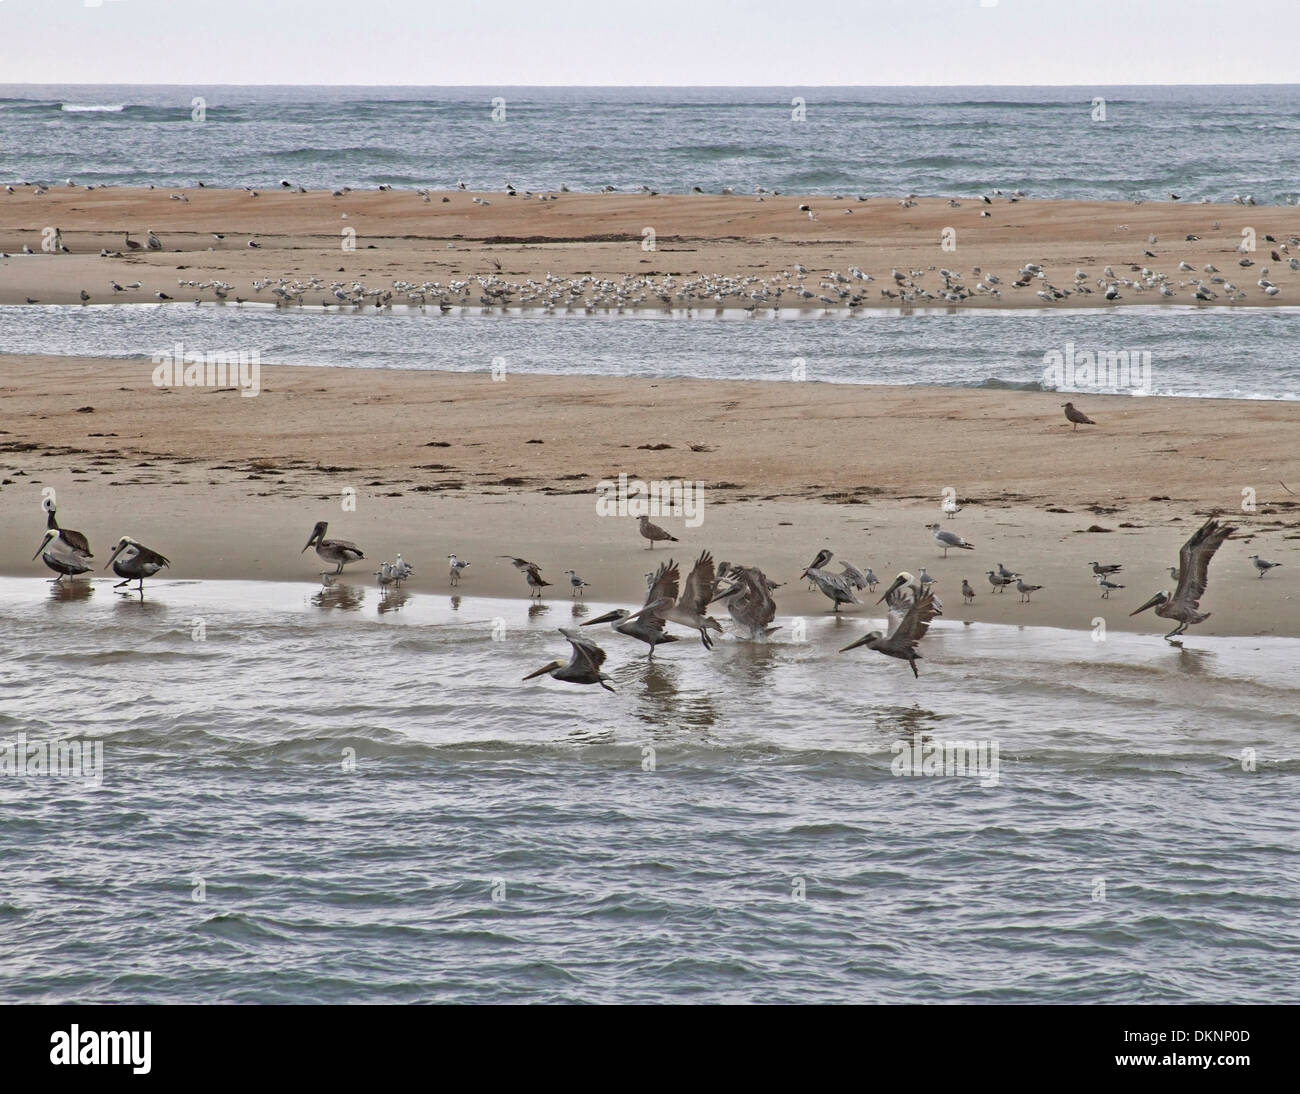 Pelicans, seagulls, sandpipers and other sea birds populate an isolated sand bar in the Pamlico Sound in the Outer Banks of NC Stock Photo